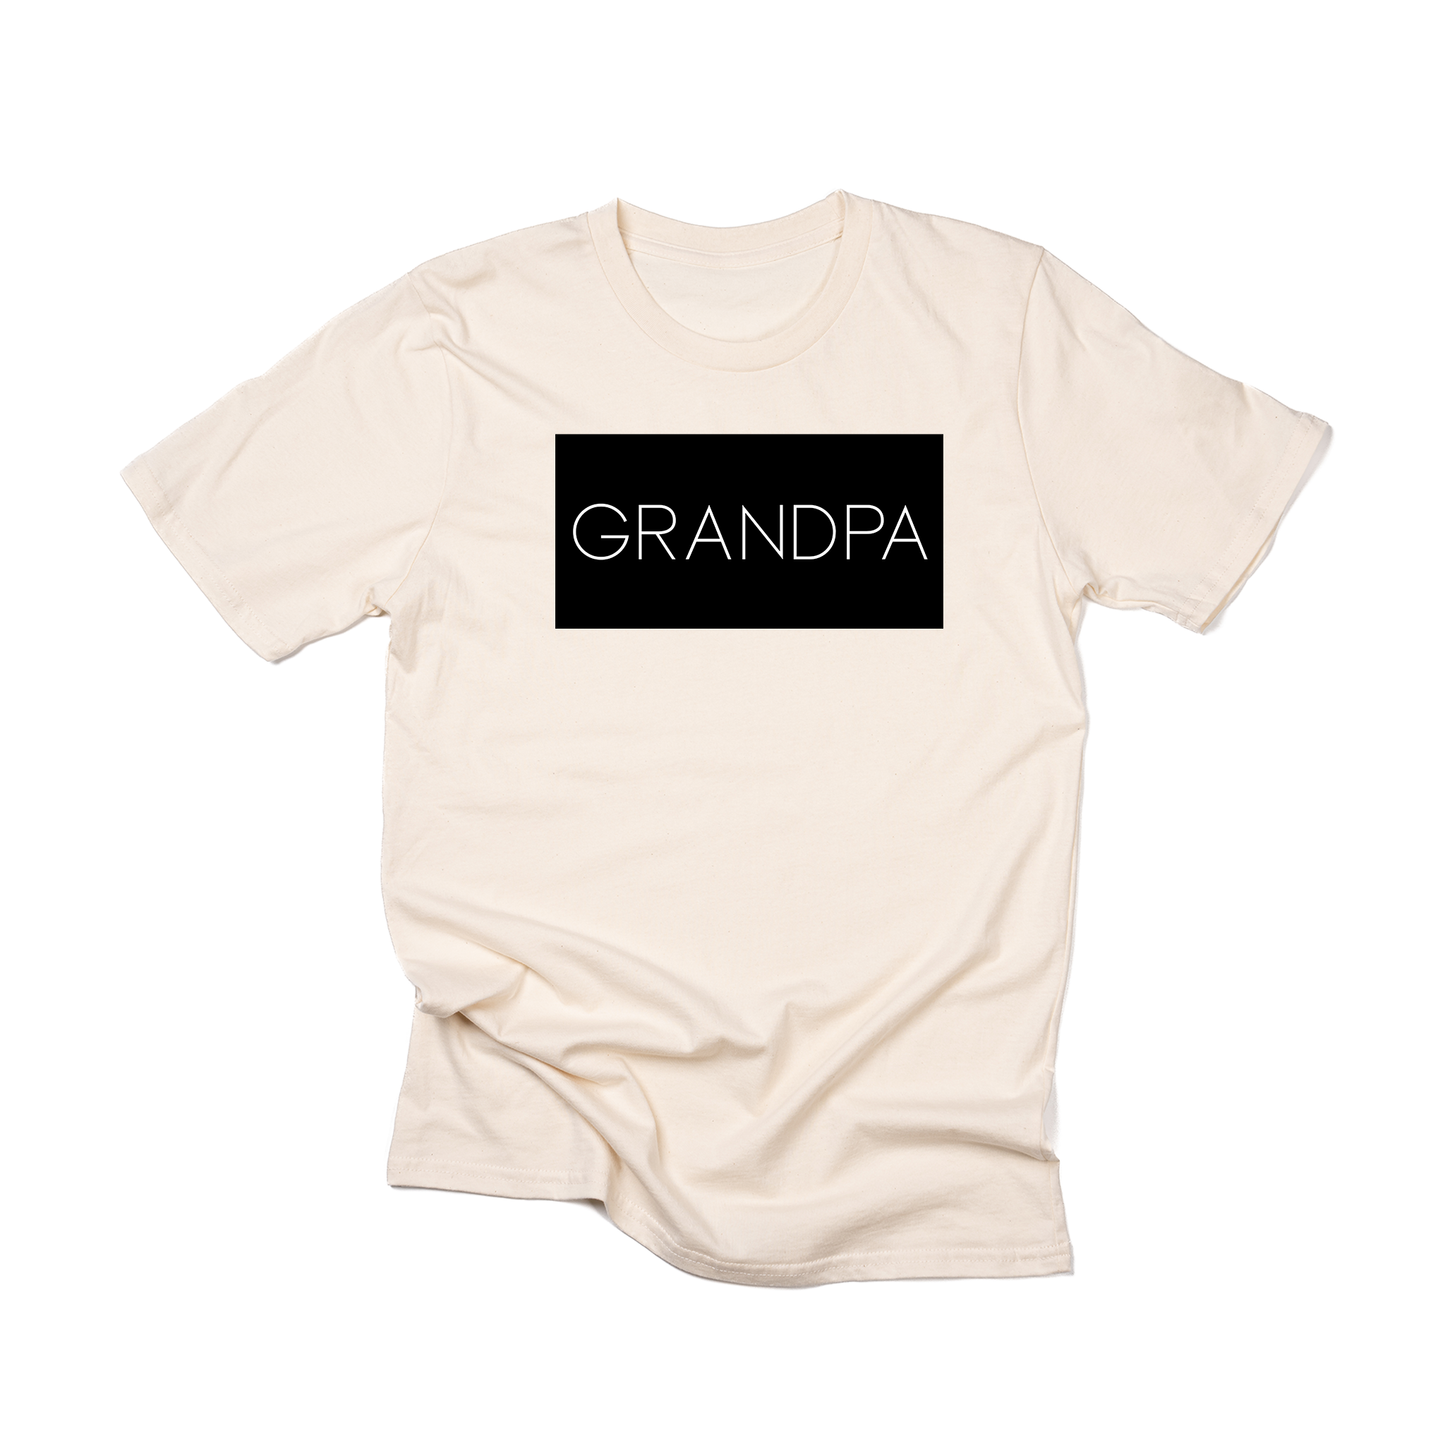 Grandpa (Boxed Collection, Black Box/White Text, Across Front) - Tee (Natural)